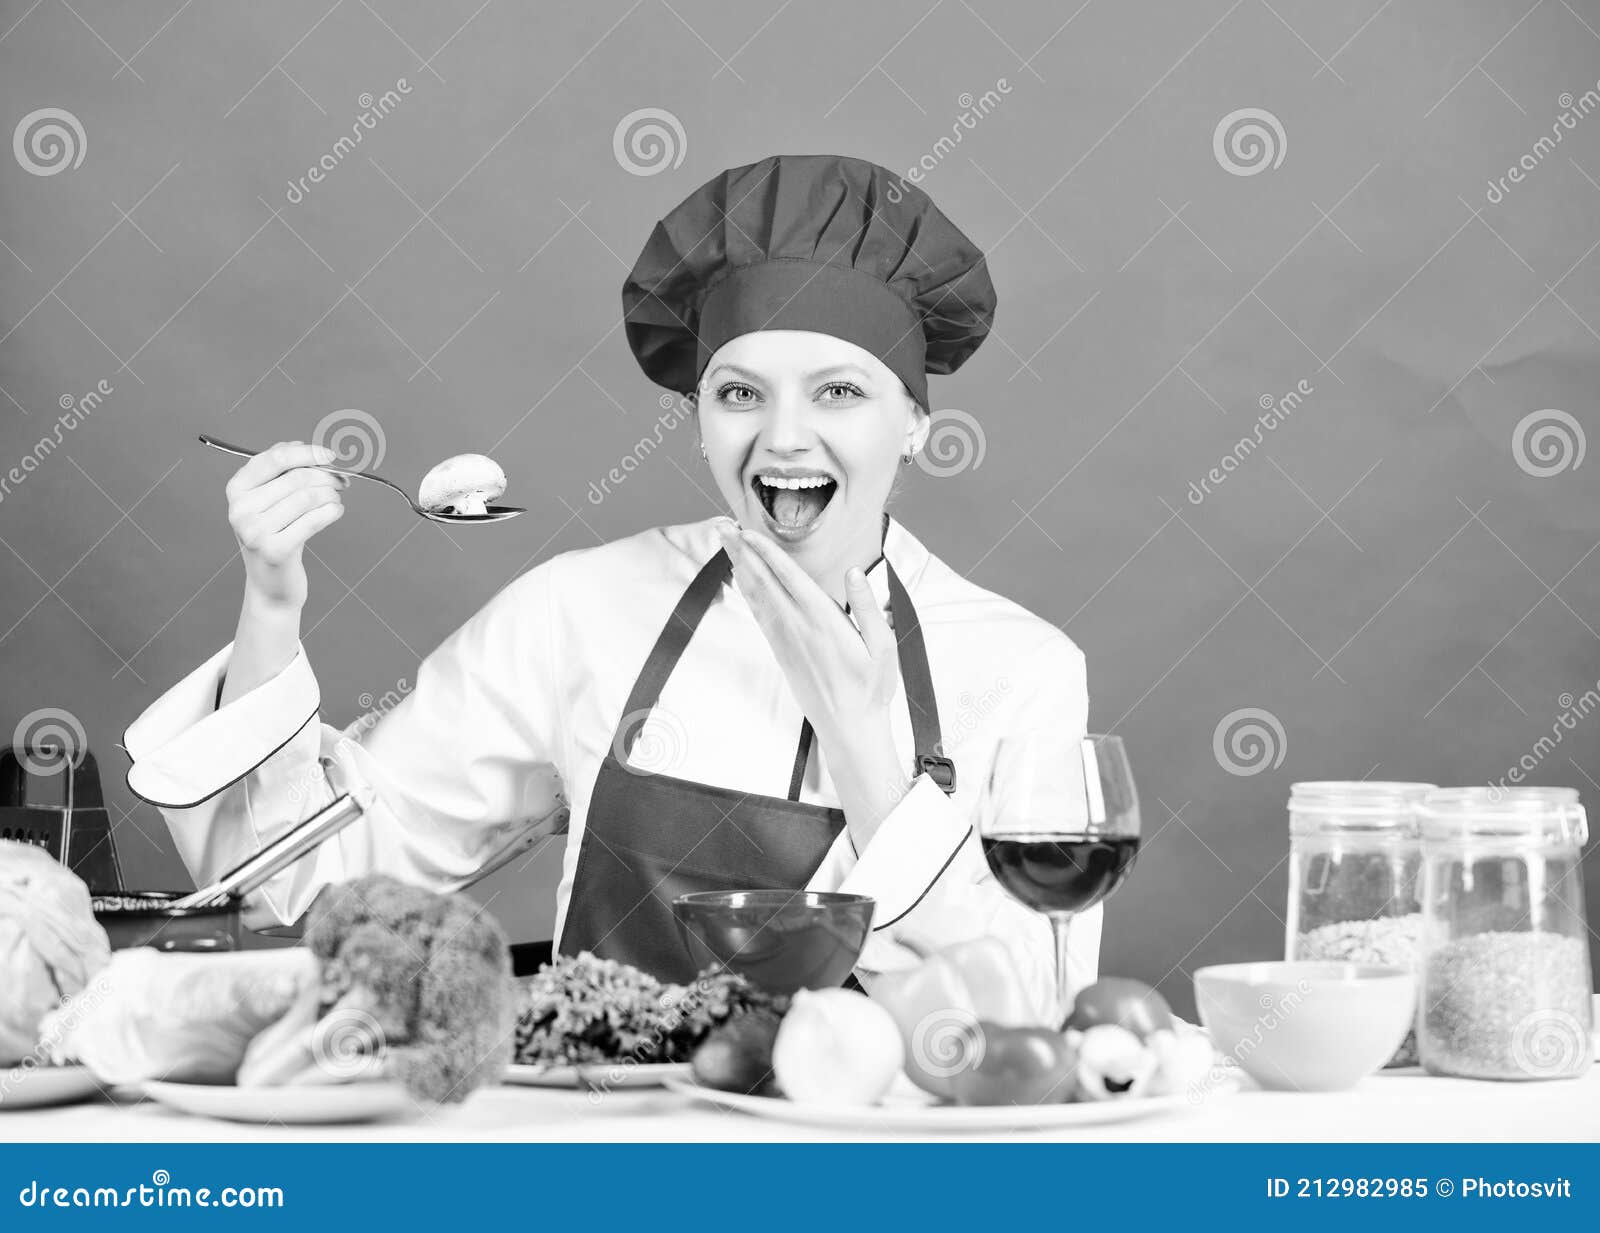 Cooking Meal. Girl at Kitchen Table. Cooking Food and Housekeeping ...